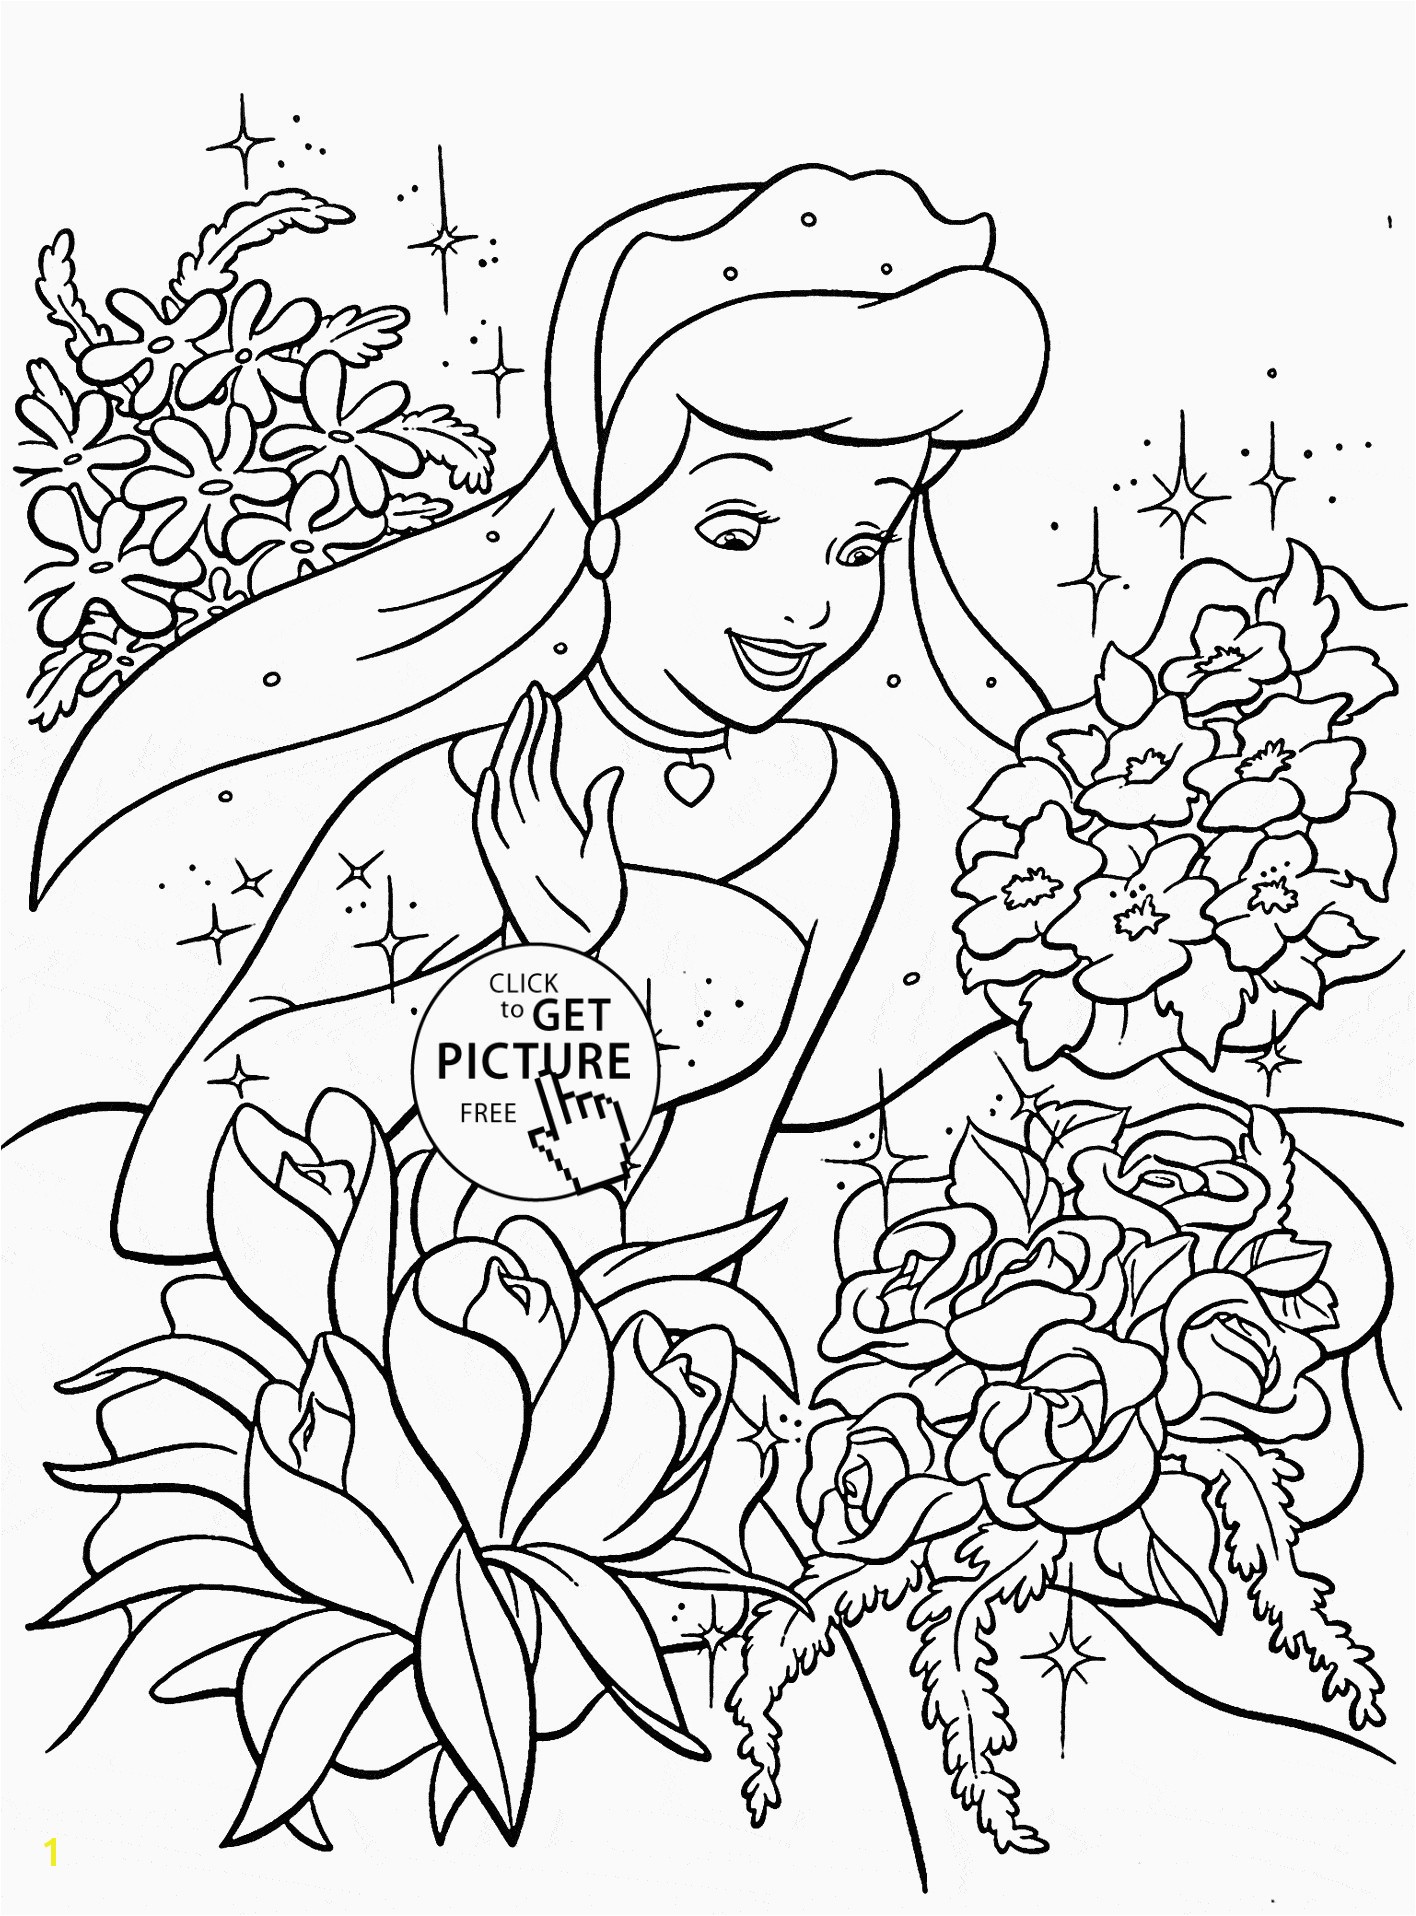 Toy Story 1 Coloring Pages toy Story 1 Coloring Pages Best toy Story Sheriff Woody and Buzz